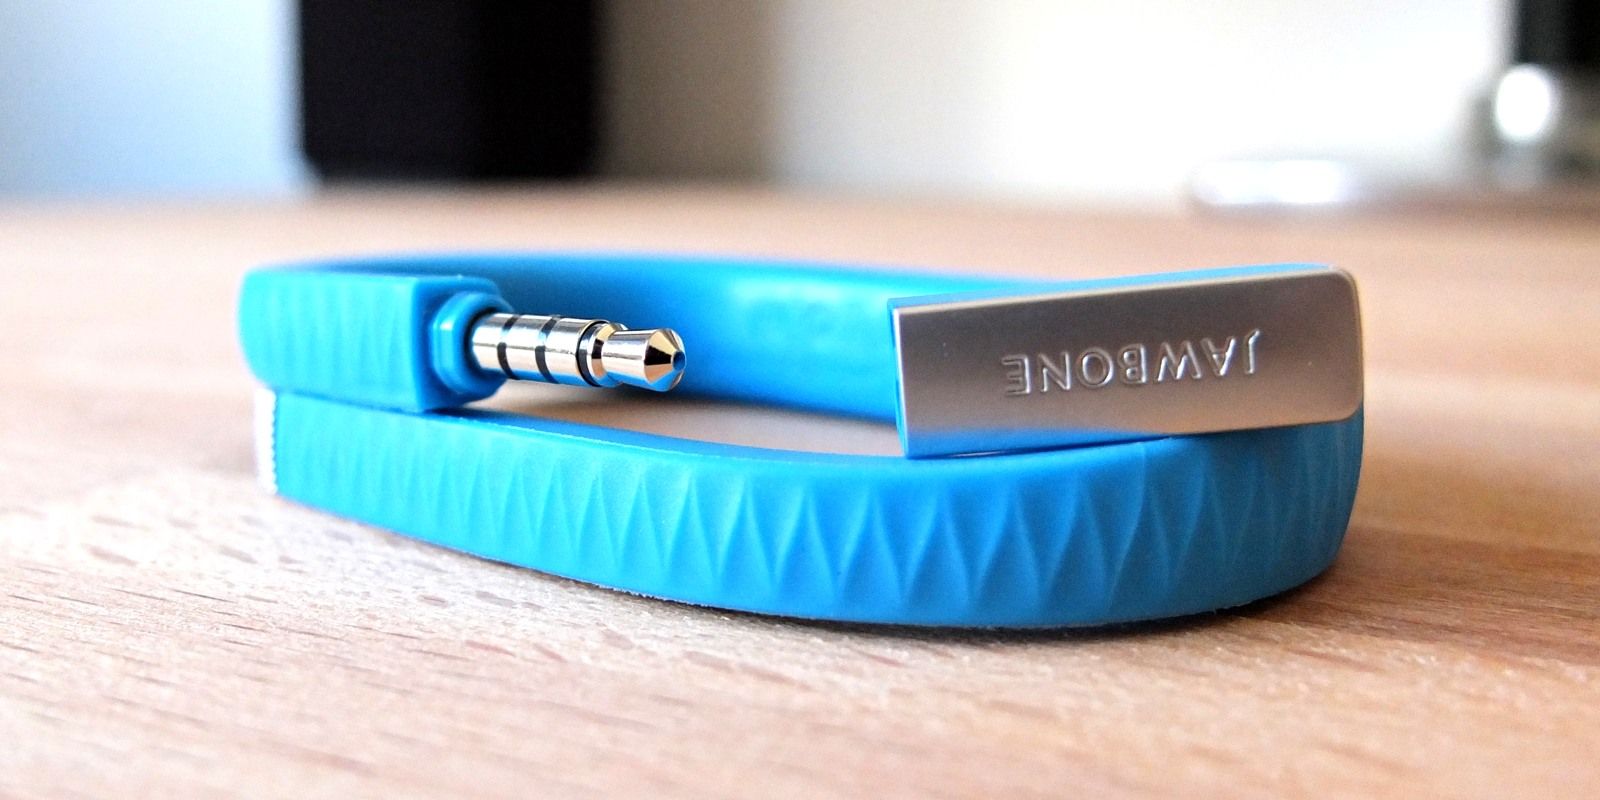 jawbone up review